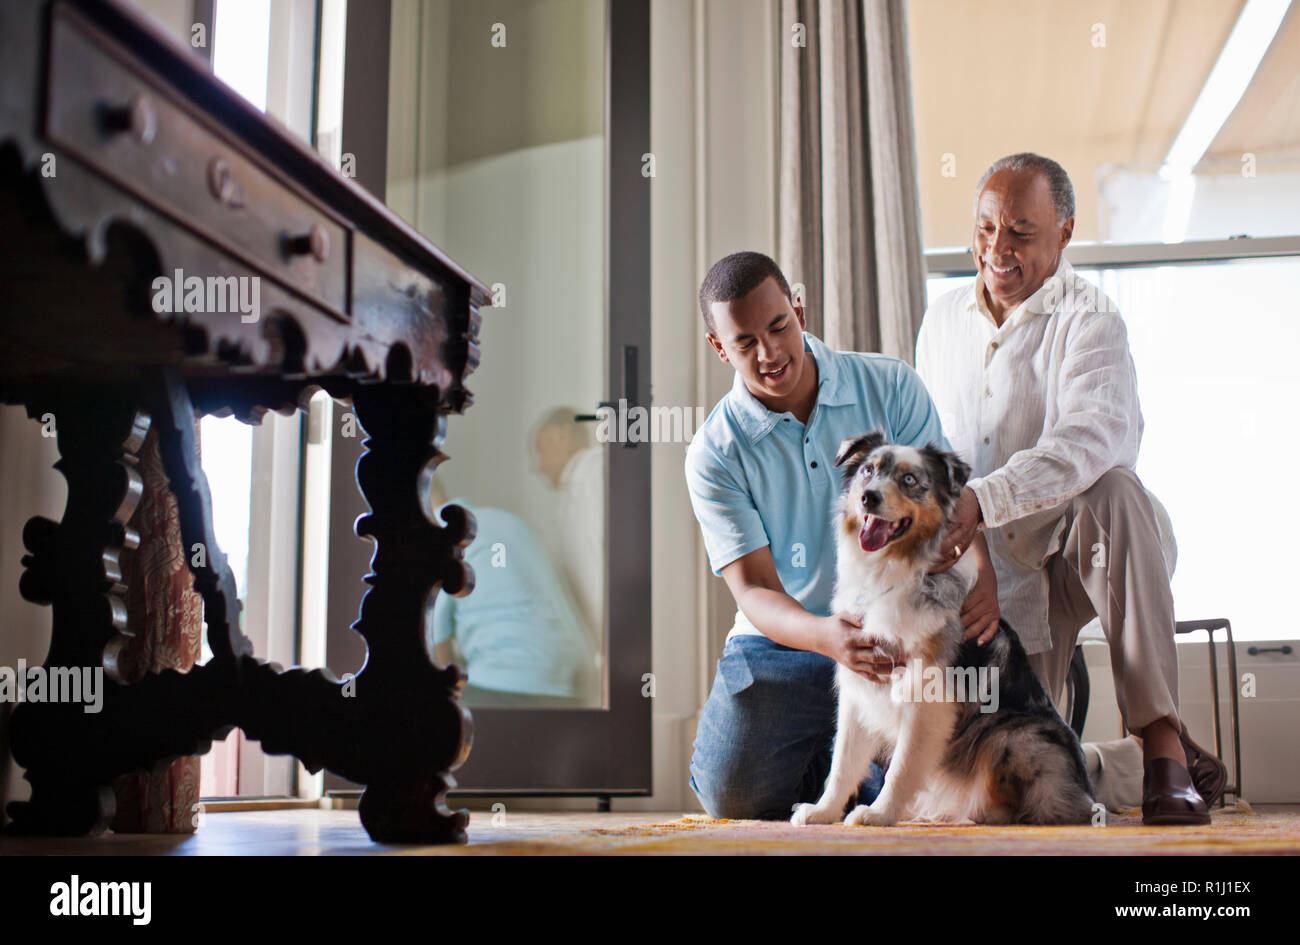 Smiling father and son petting their dog. Stock Photo